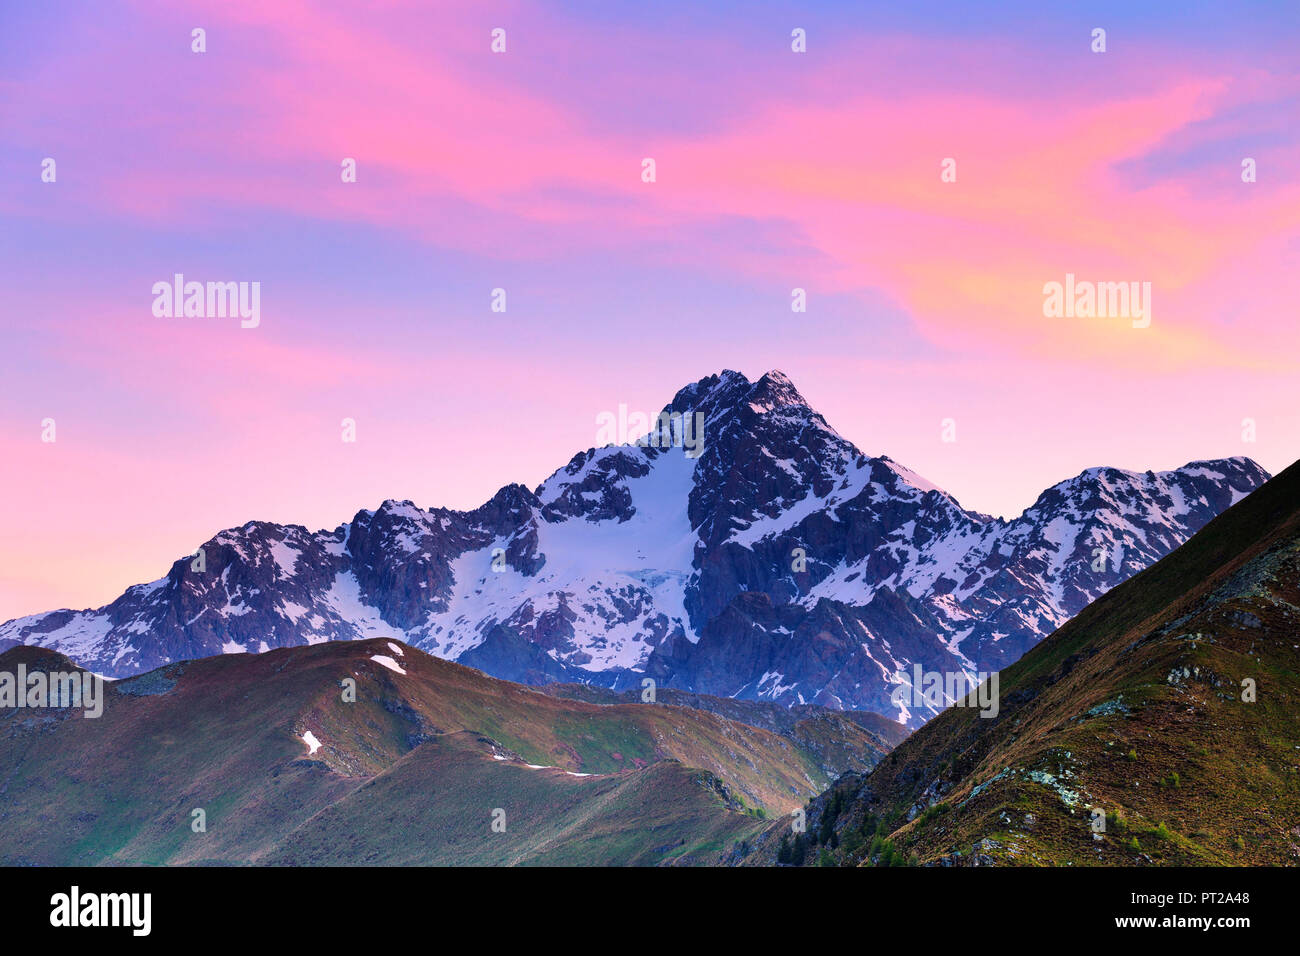 Colourful clouds above Mount Disgrazia during sunrise, Valtellina, Lombardy, Italy, Europe, Stock Photo